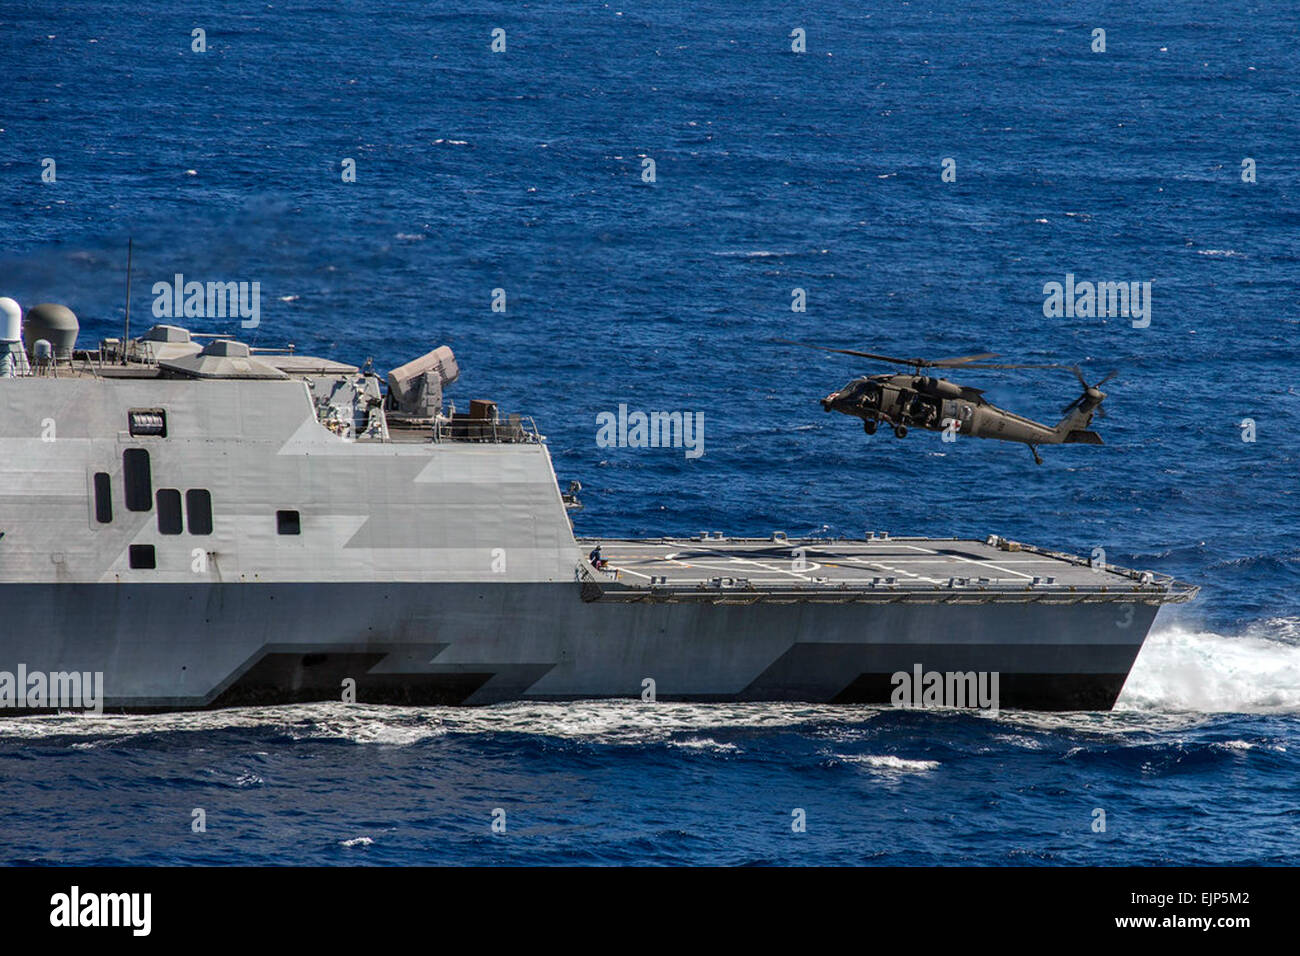 A U.S. Army 25th Combat Aviation Brigade UH-60 Blackhawk helicopter crew conducts deck landing qualifications on the littoral combat ship USS Fort Worth LCS 3 off the coast of Oahu, Hawaii, Nov. 25, 2014.  MC2 Antonio P. Turretto Ramos Stock Photo